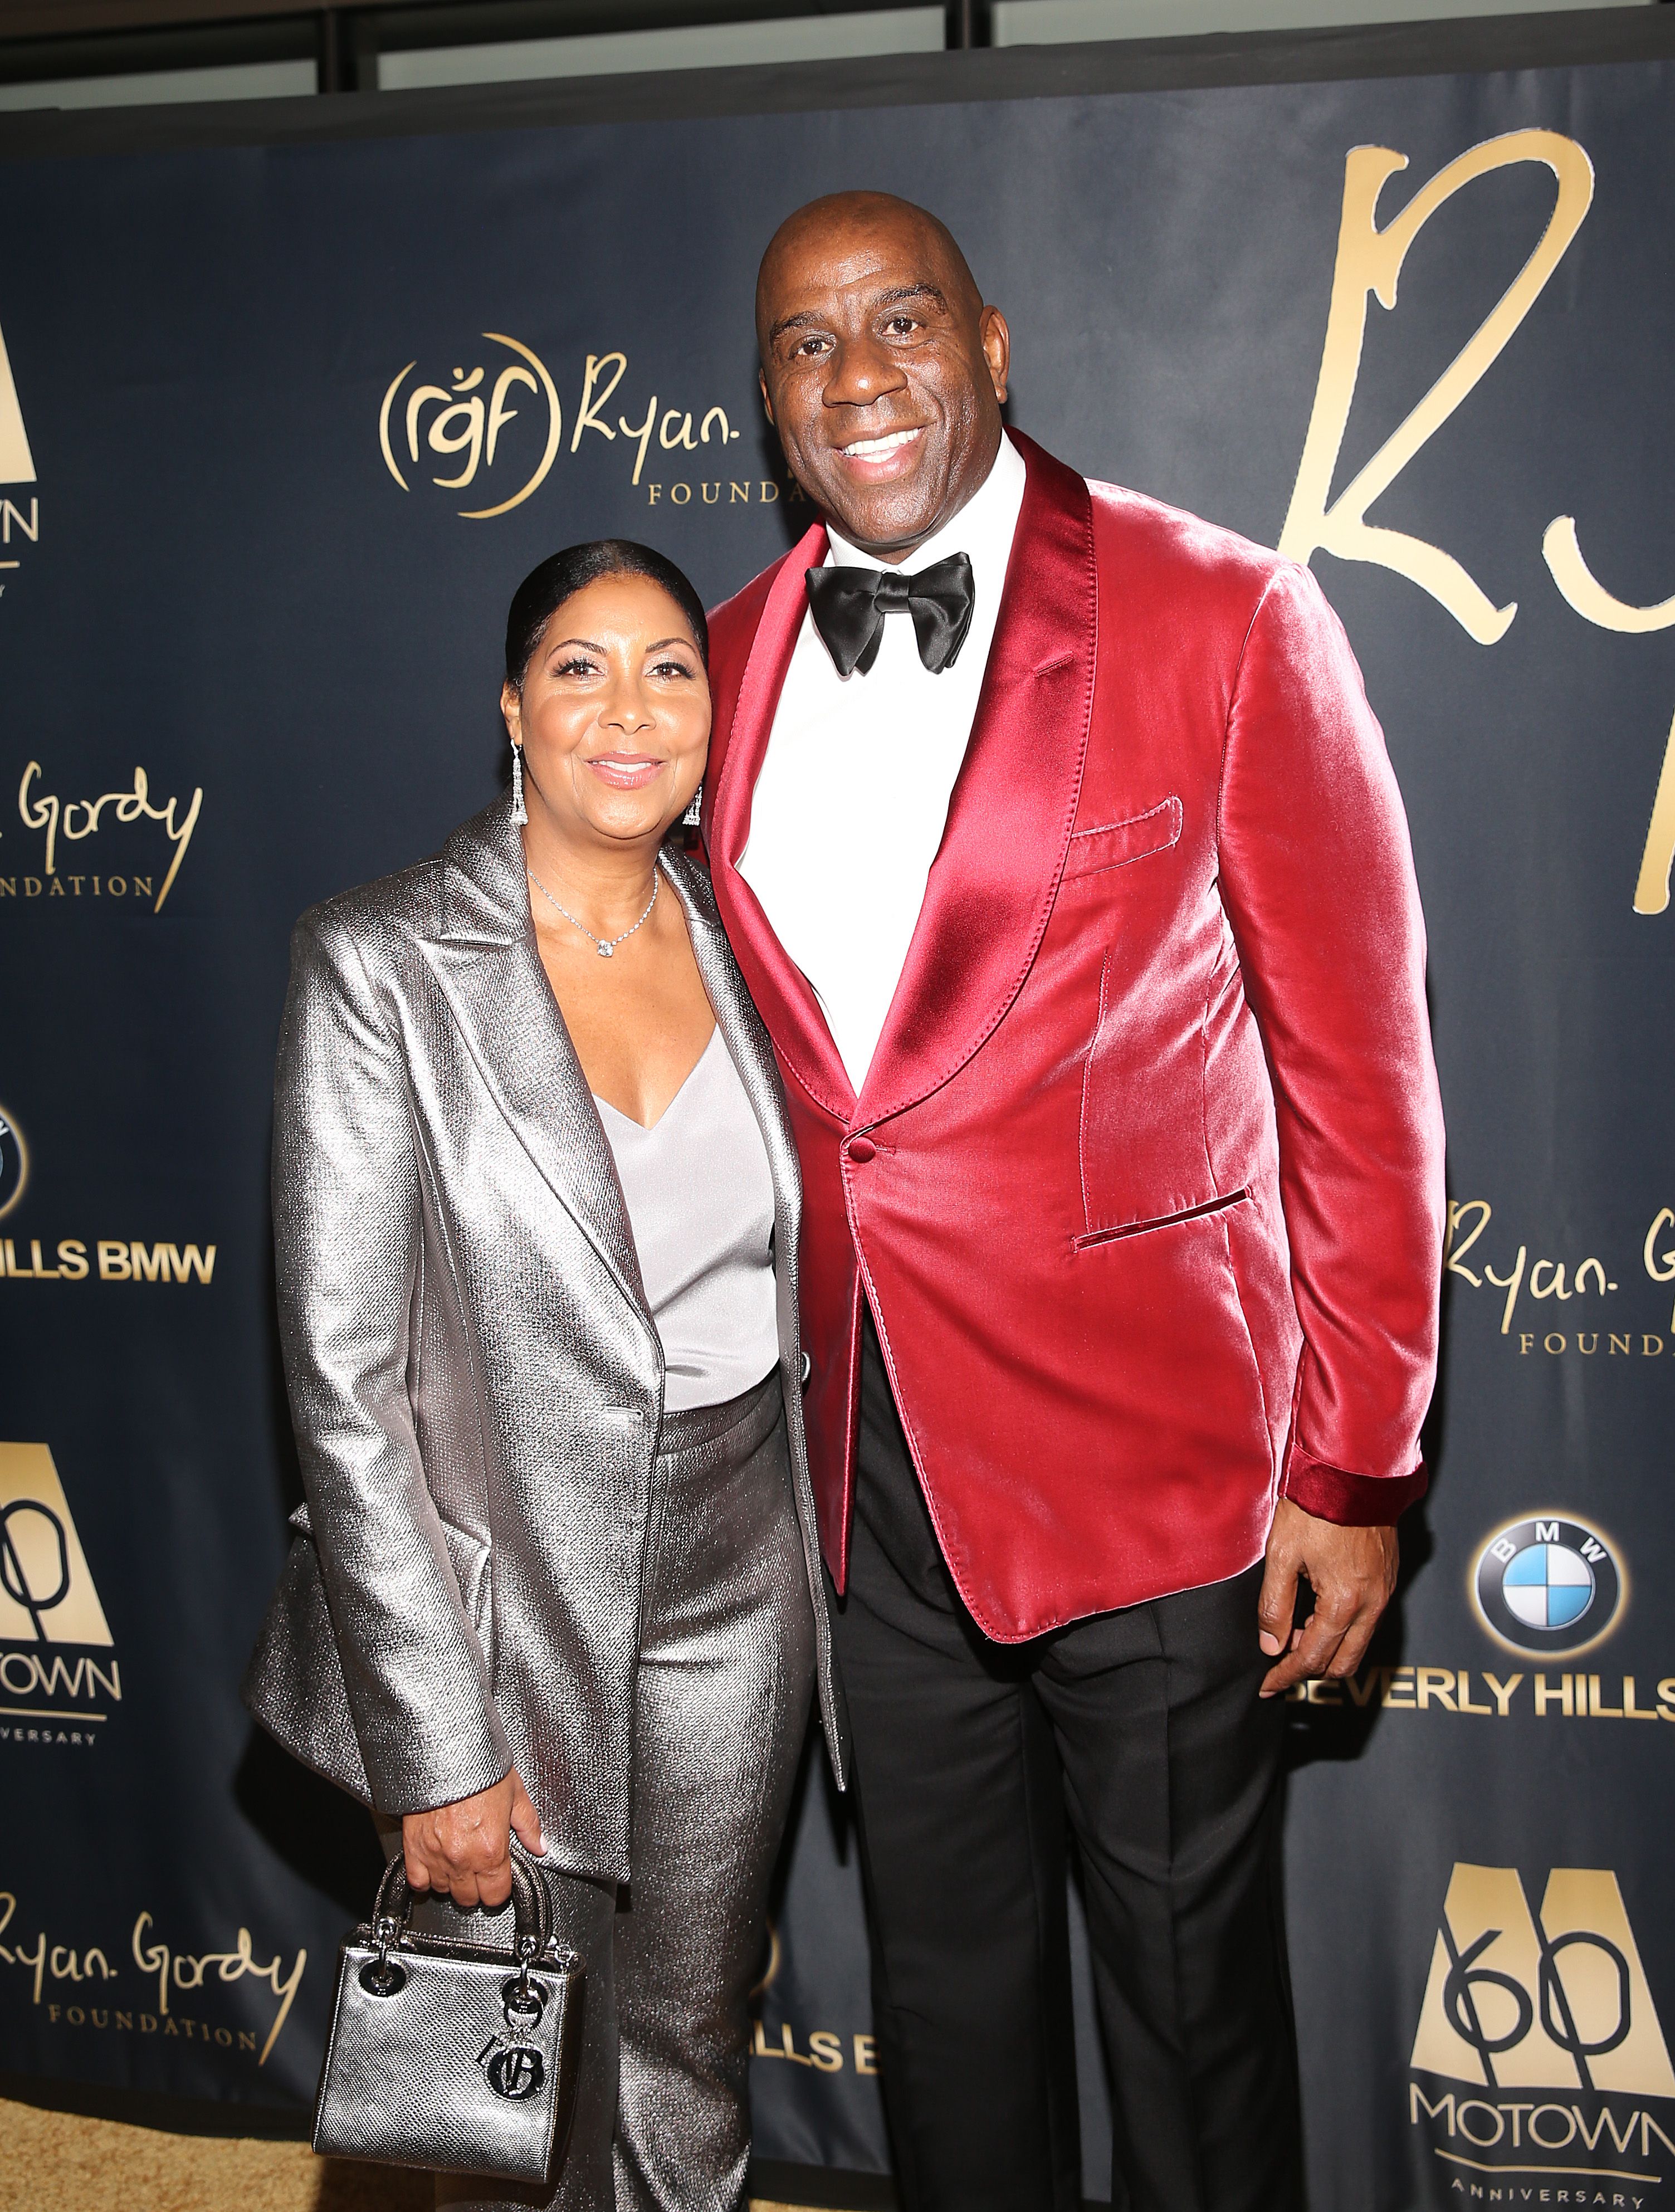 Cookie Johnson and Earvin "Magic" Johnson at the Ryan Gordy Foundation's "60 Years of Motown" celebration at the Waldorf Astoria Beverly Hills on November 11, 2019. | Photo: Getty Images